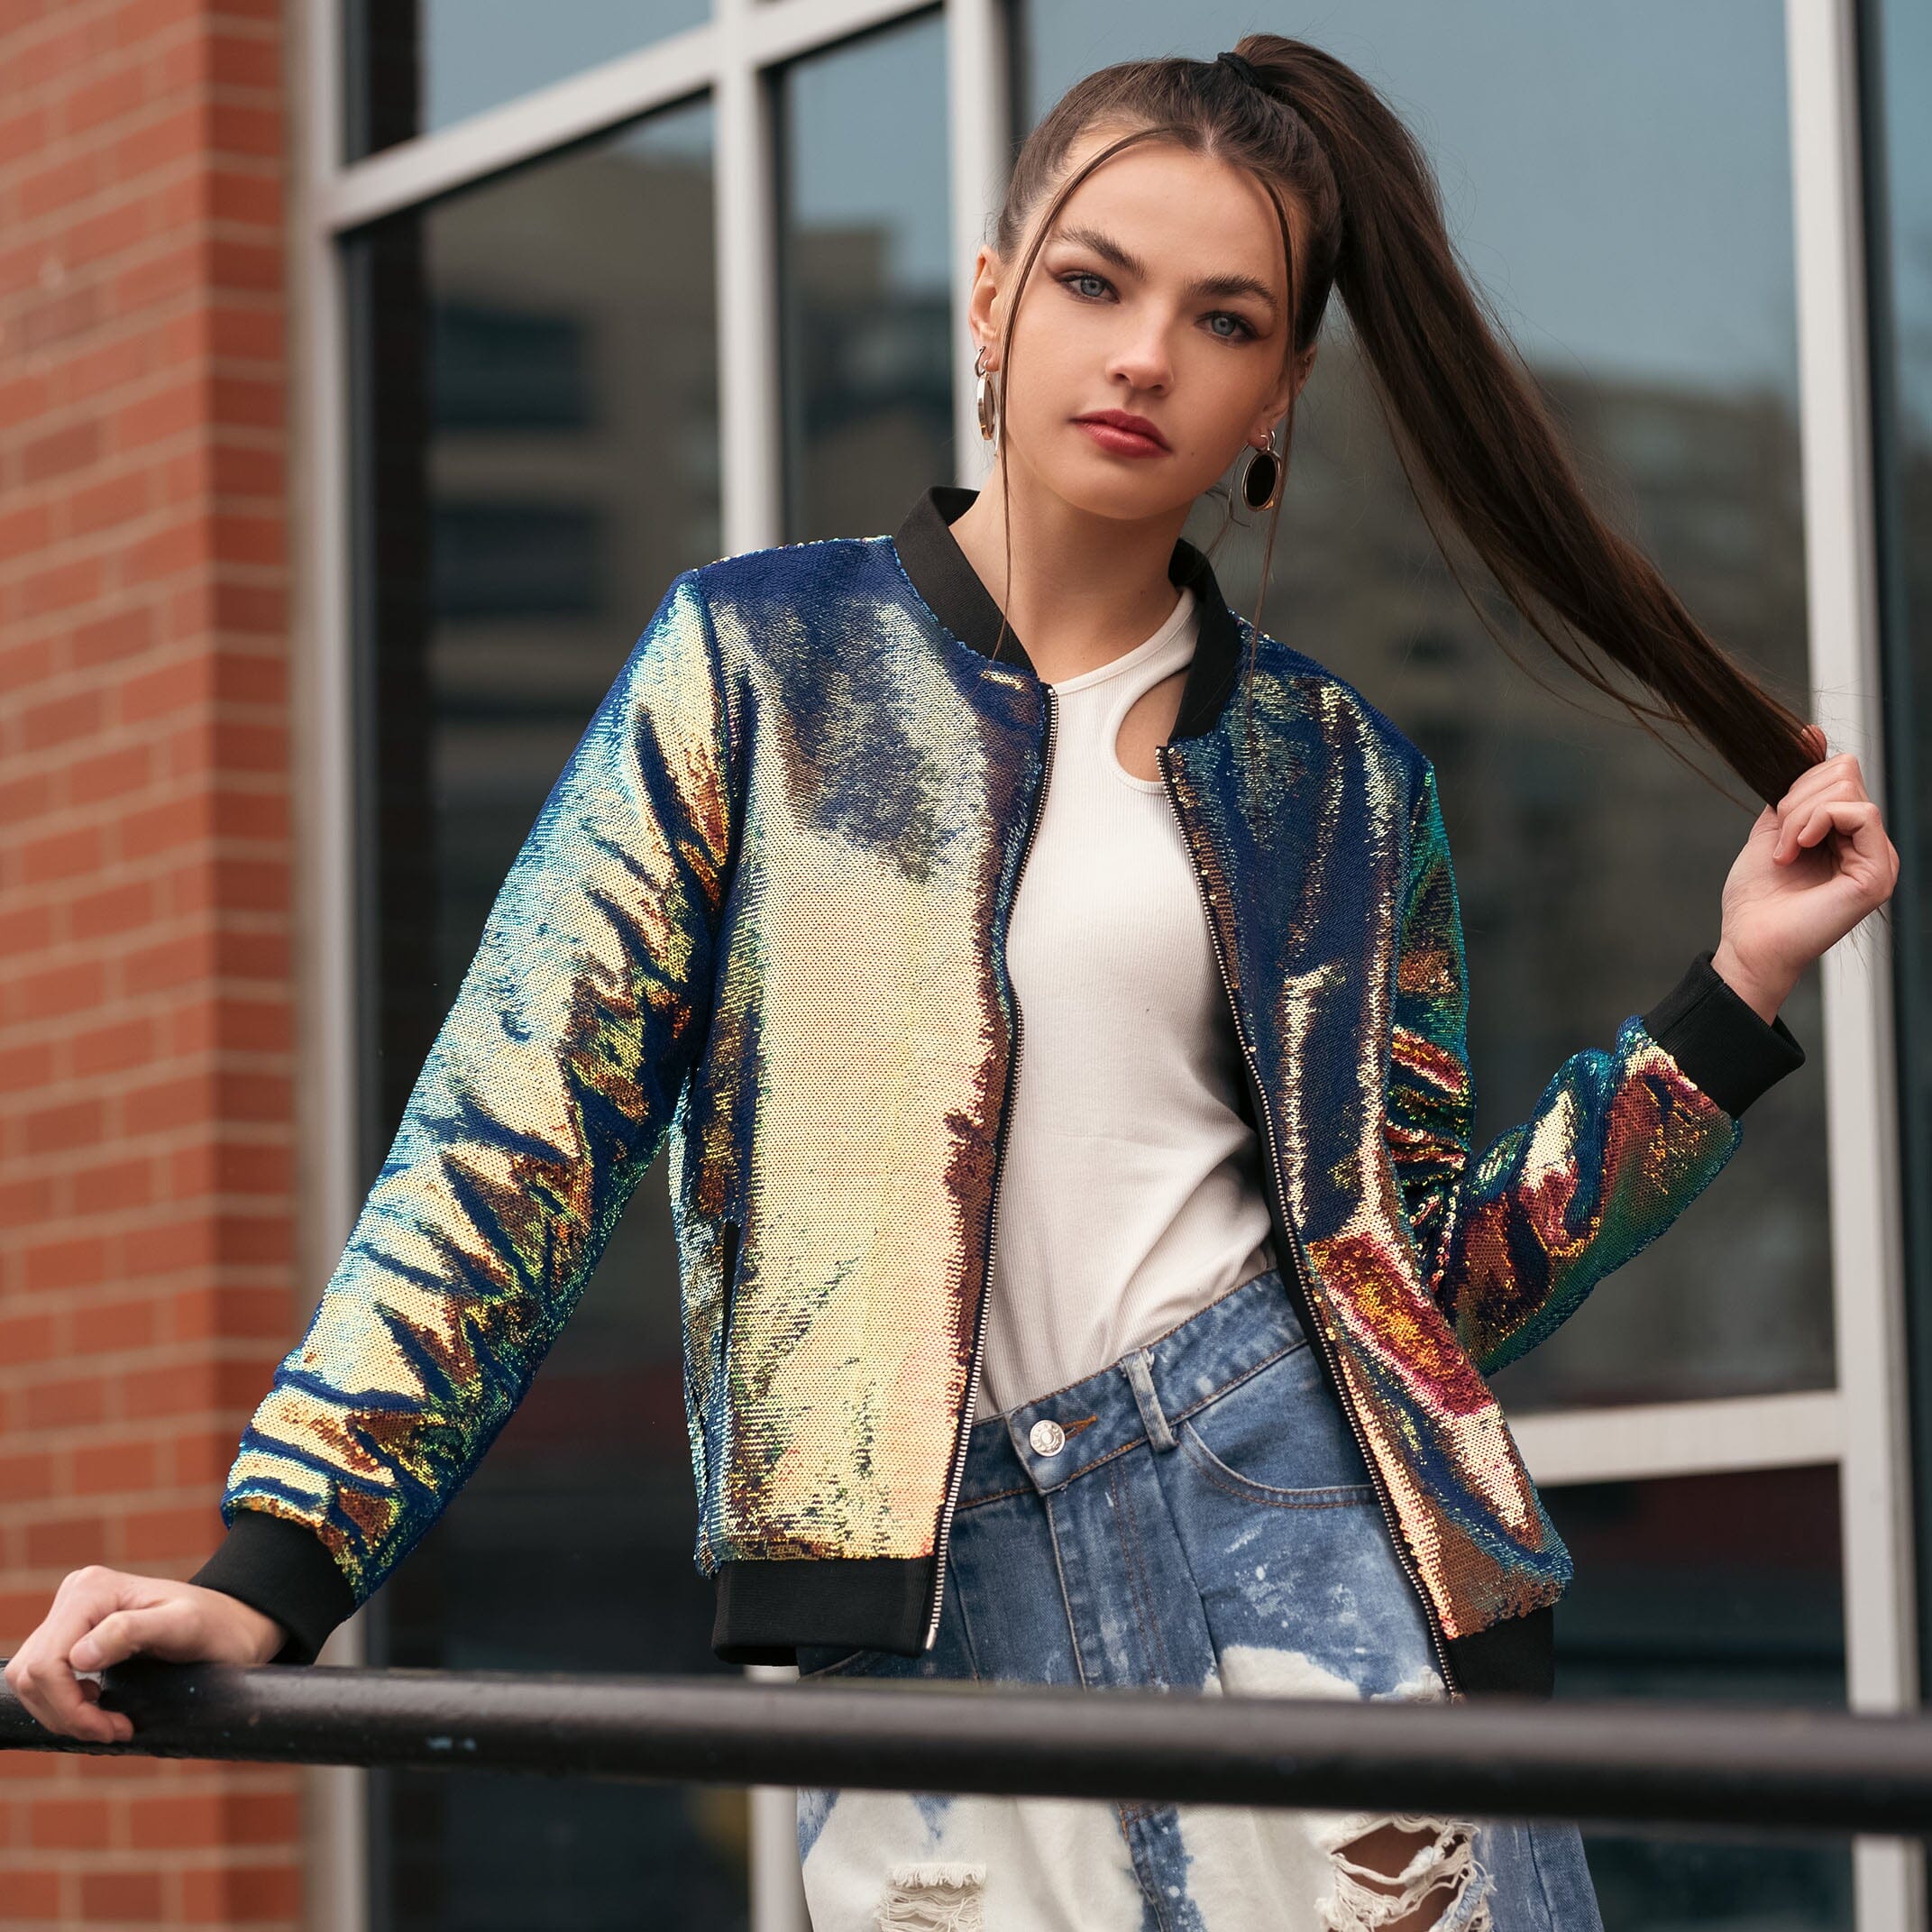 Catch all the attention in the sequin bomber jacket